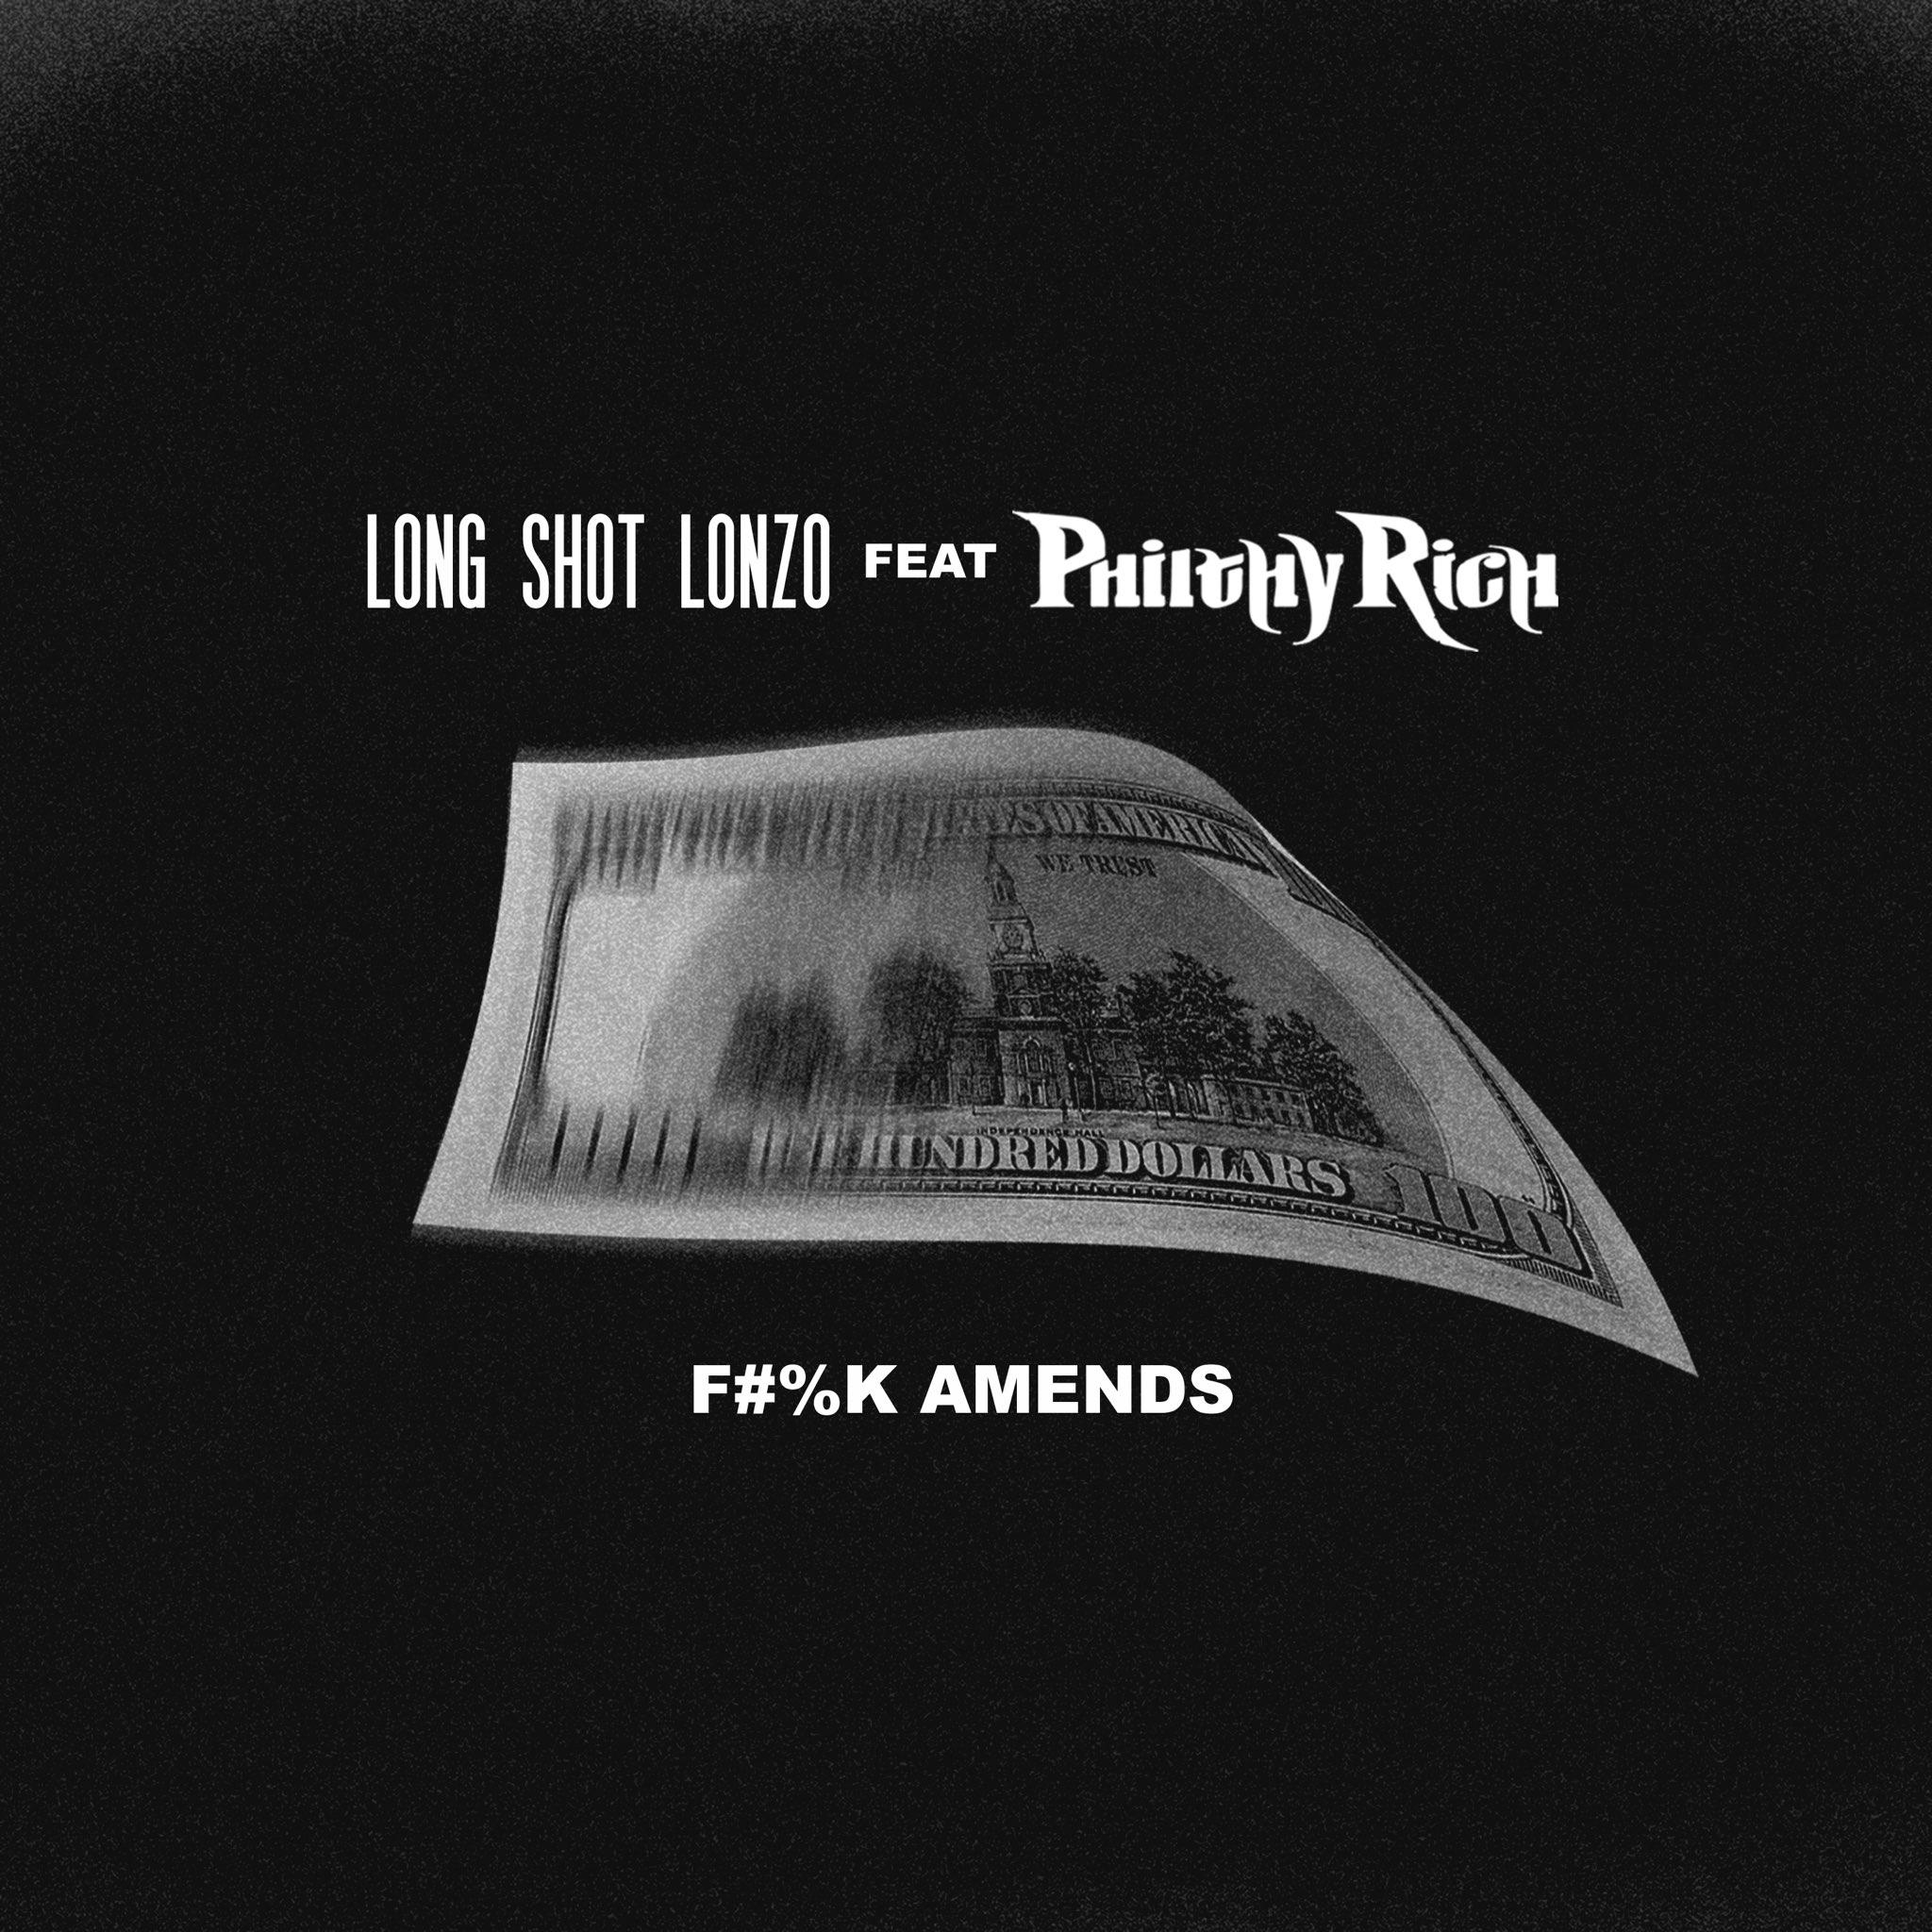 F#%k Amends (feat. Philthy Rich)